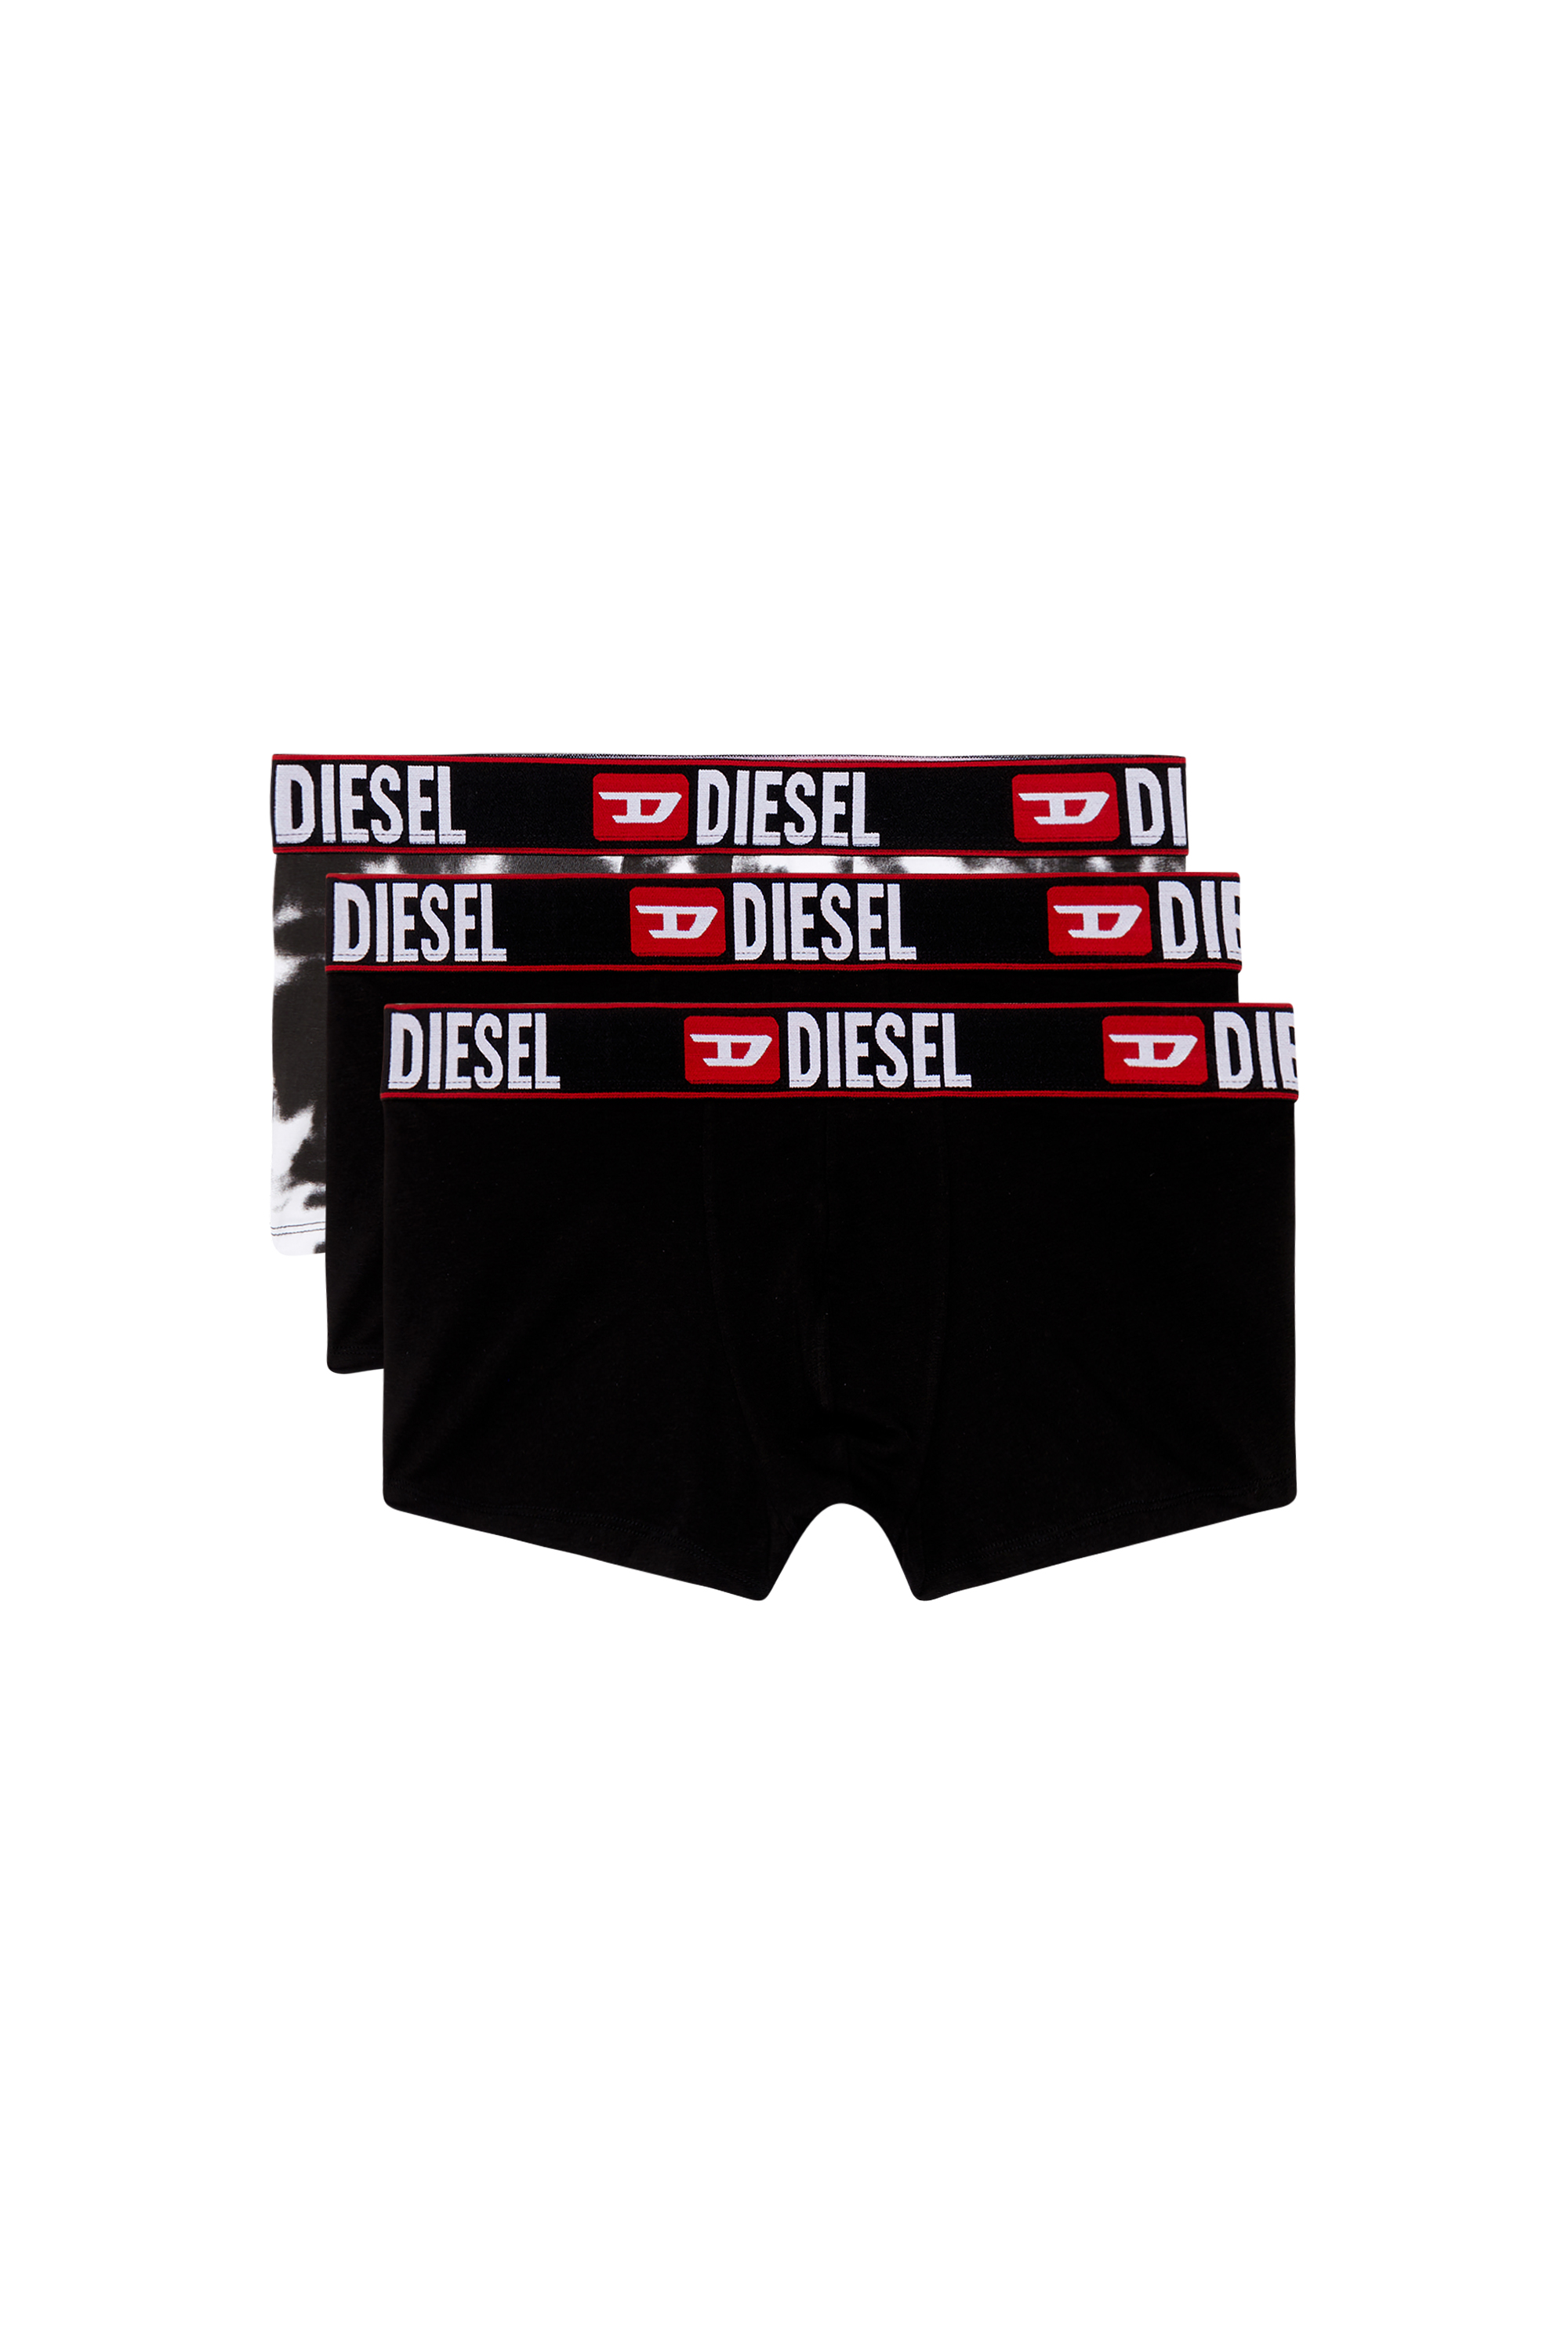 Three-pack boxer briefs plain and tie-dye